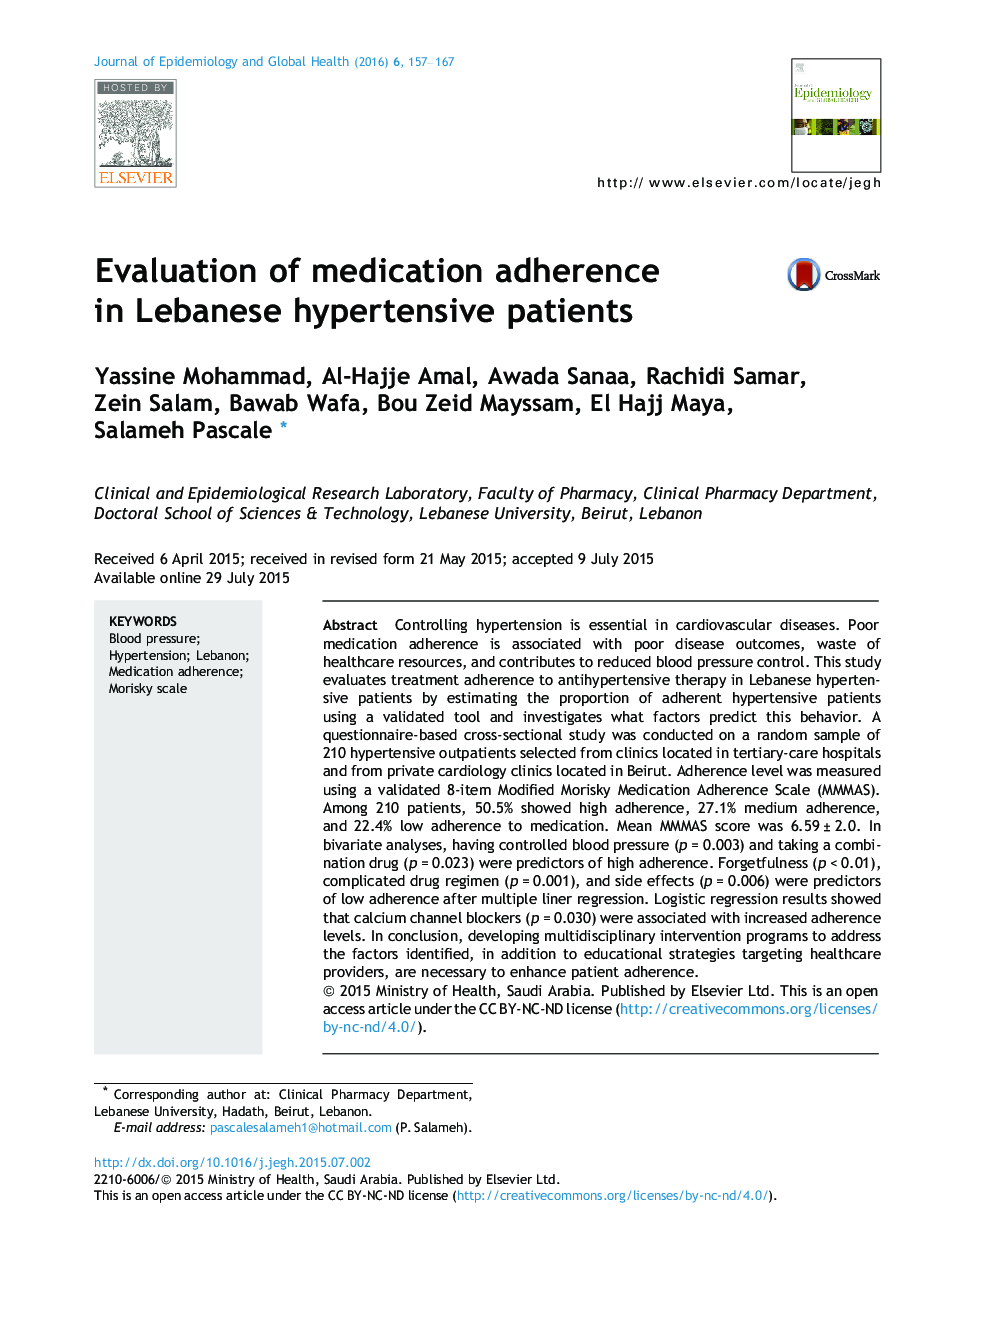 Evaluation of medication adherence in Lebanese hypertensive patients